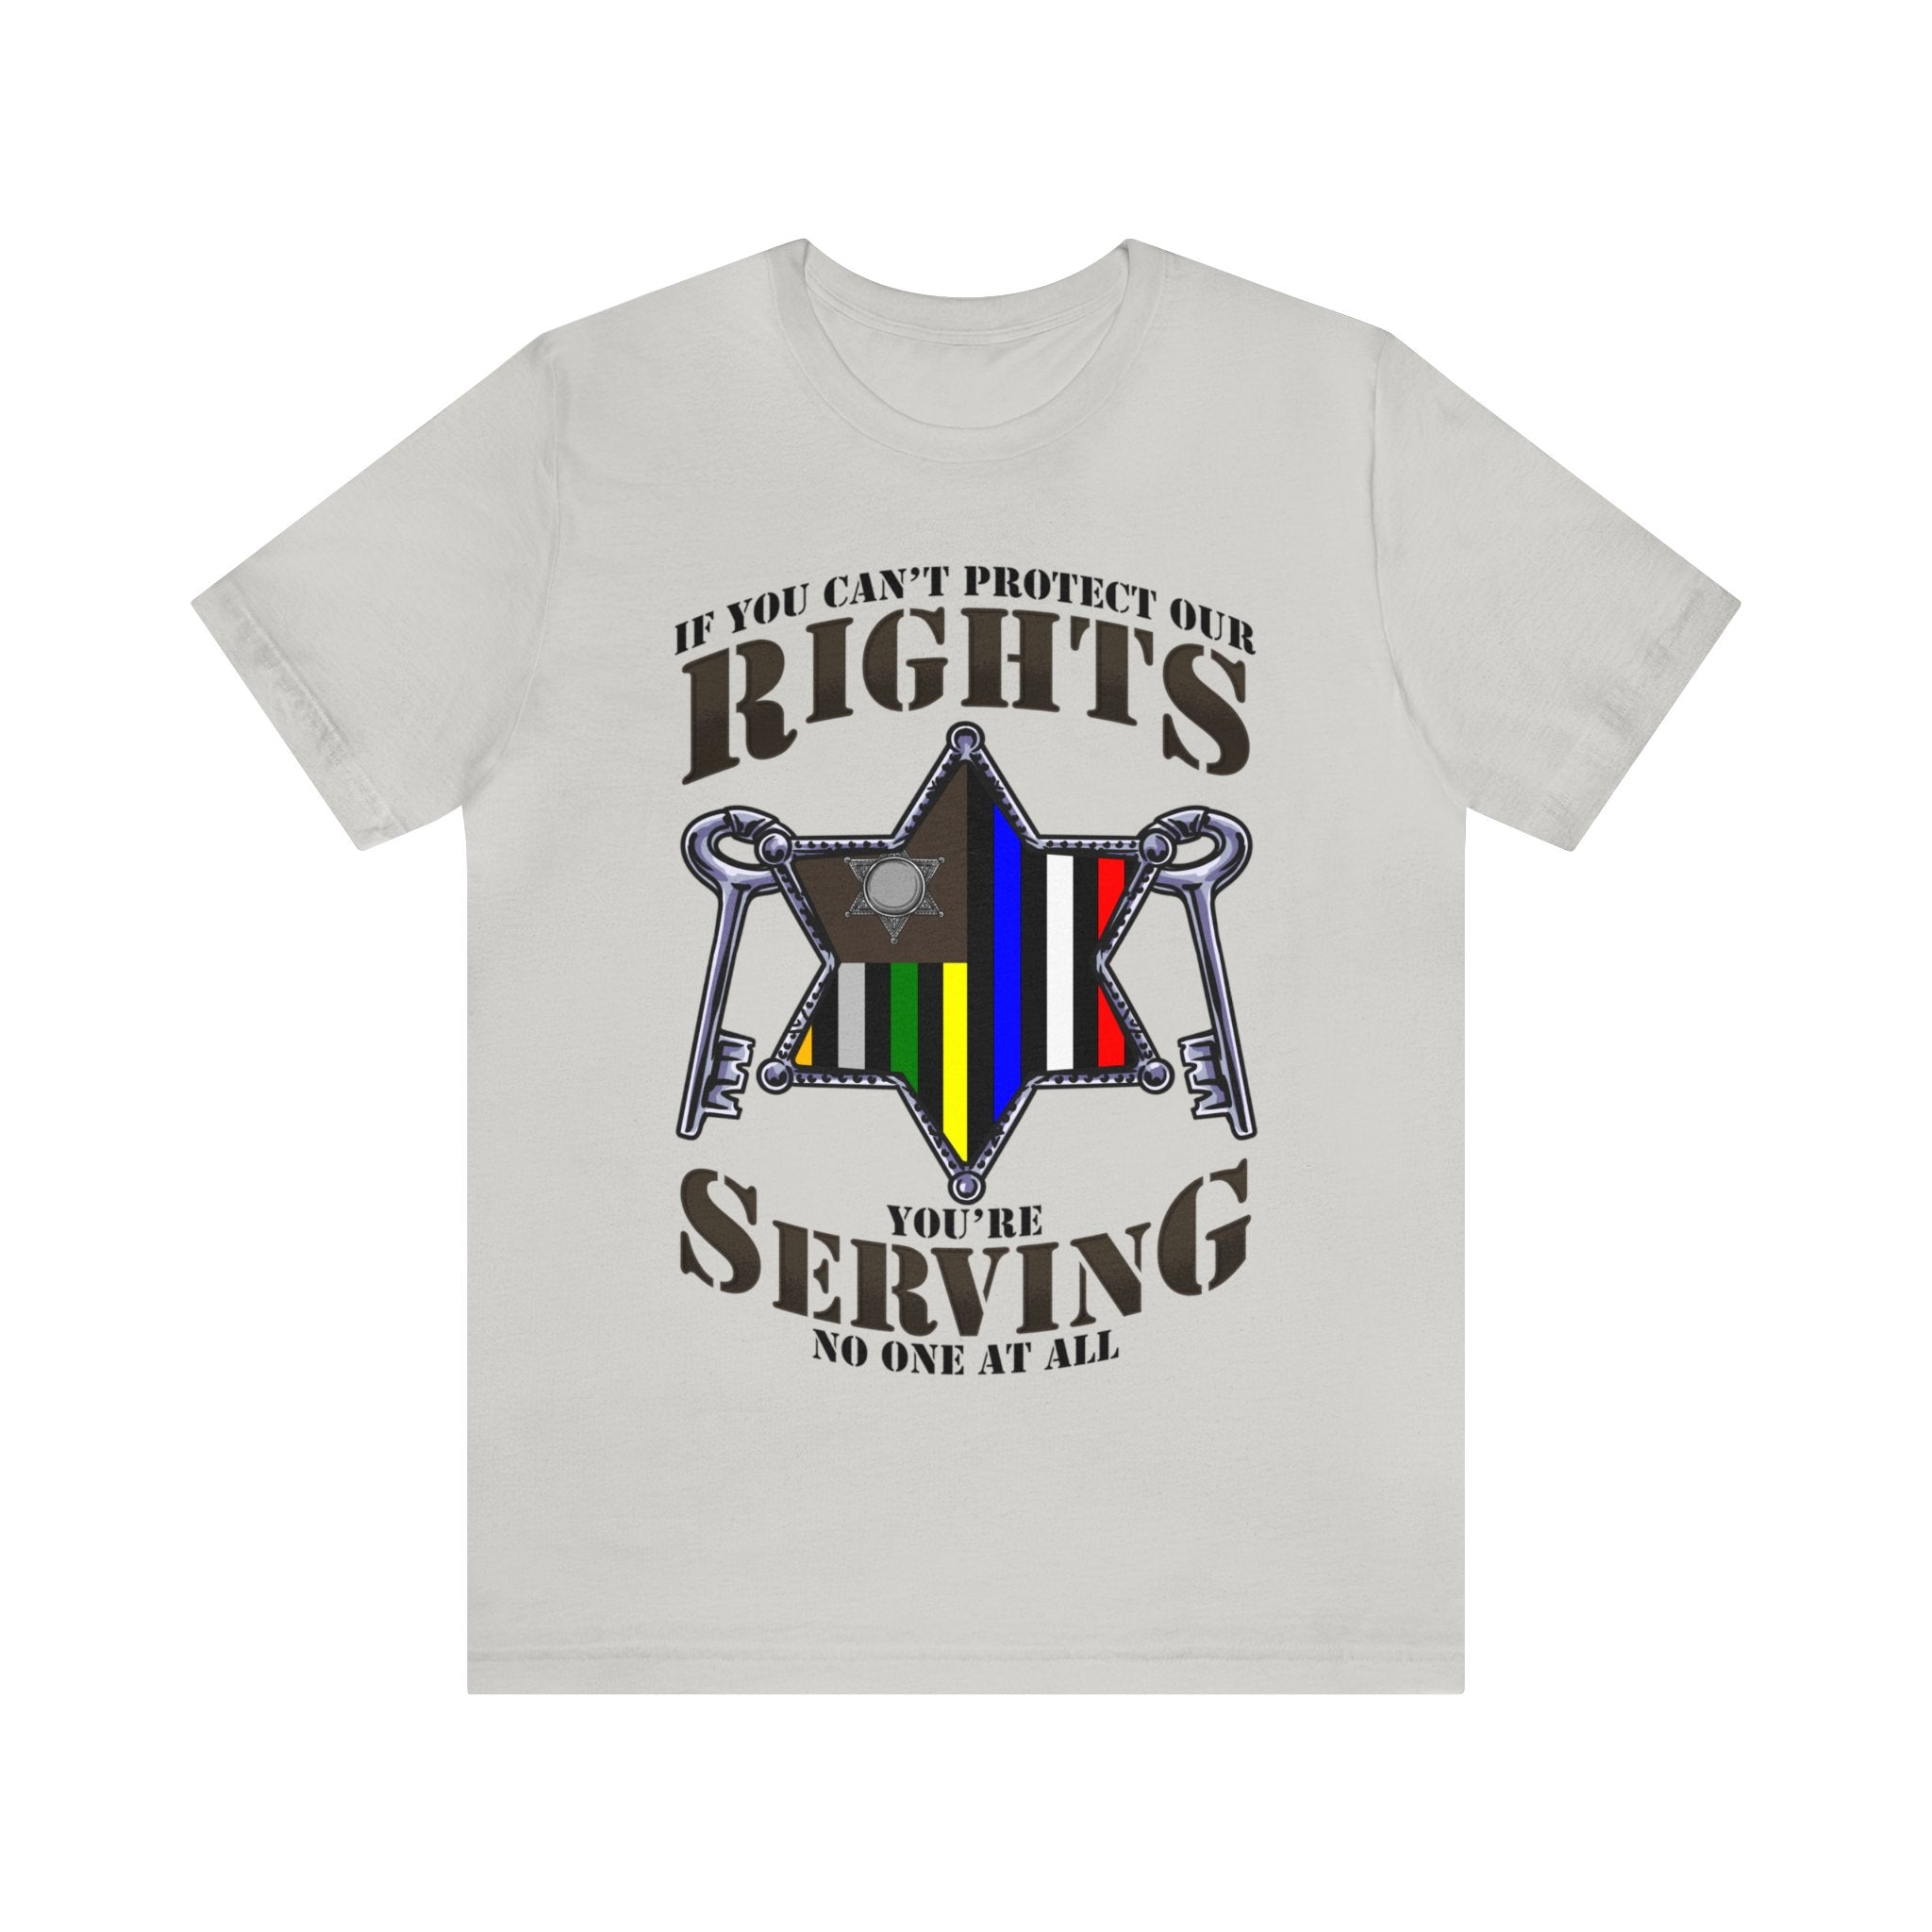 Thin Sheriff & Corrections Line Tee - Rights/Serving